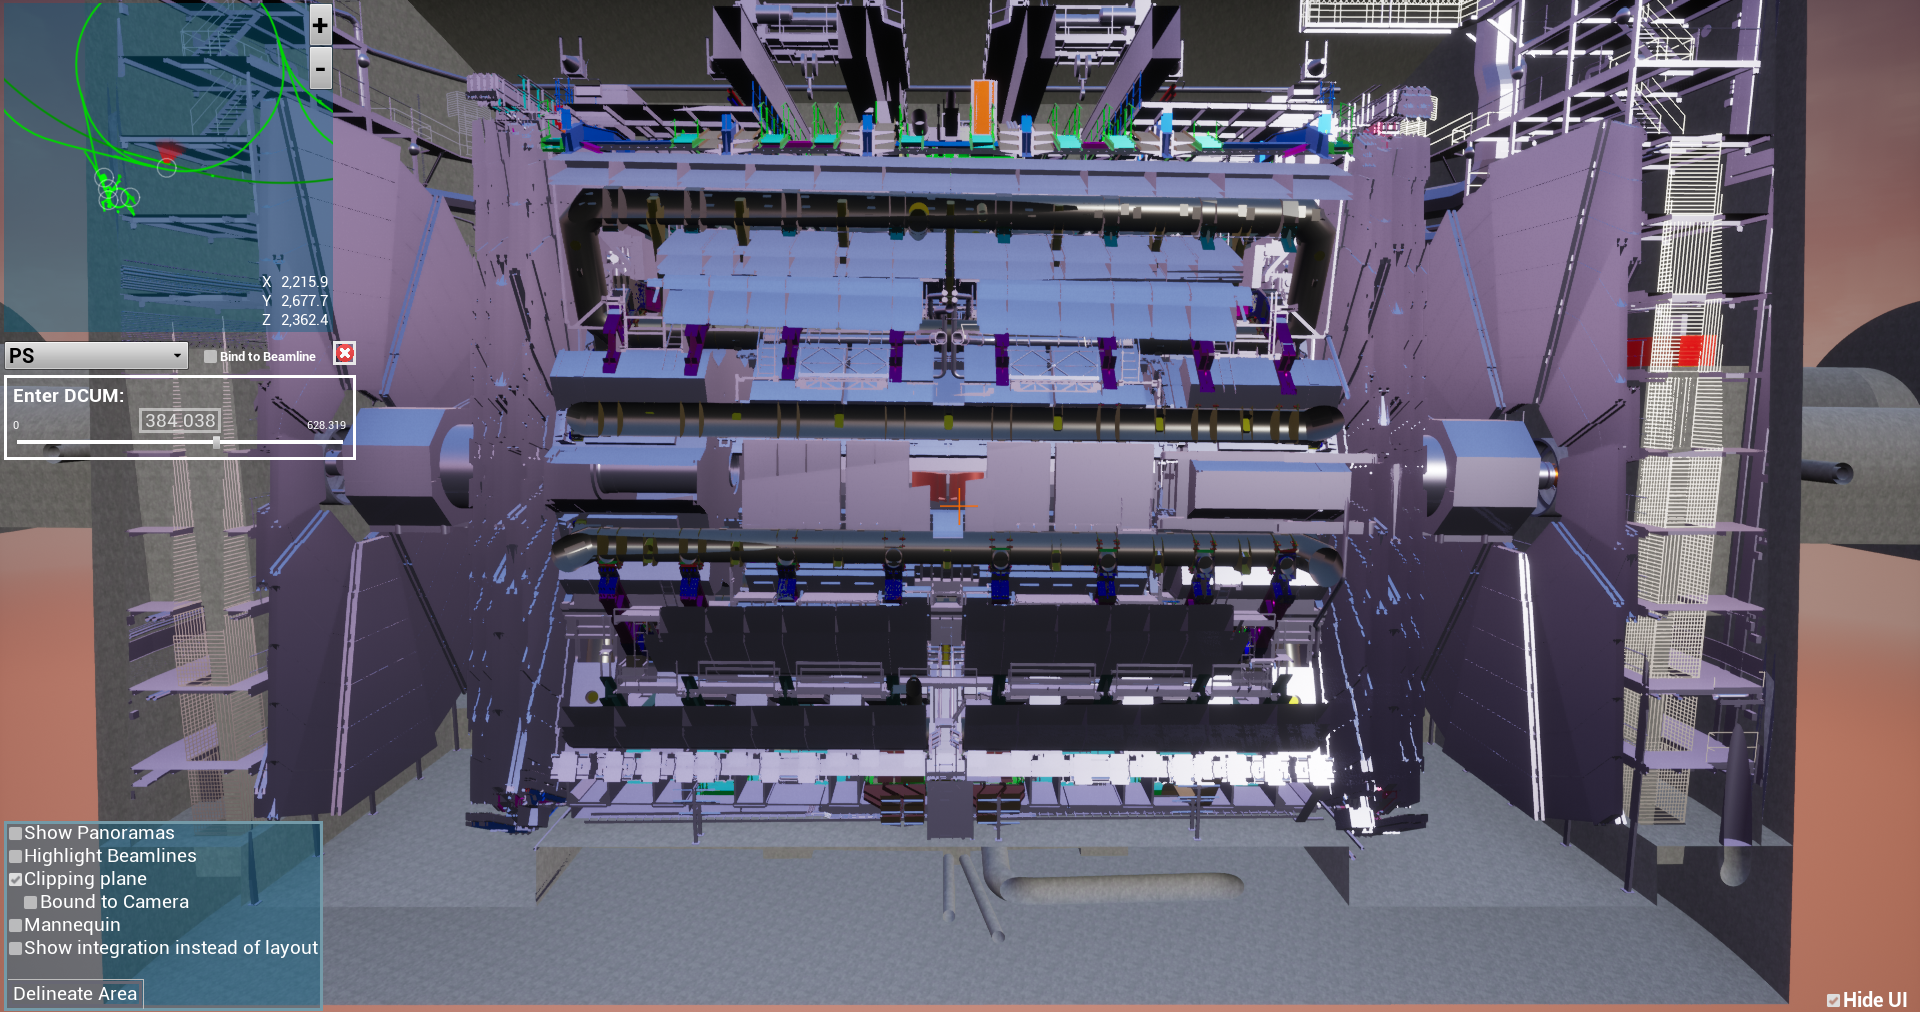 A digital twin, or virtual copy, of the ATLAS experiment at CERN